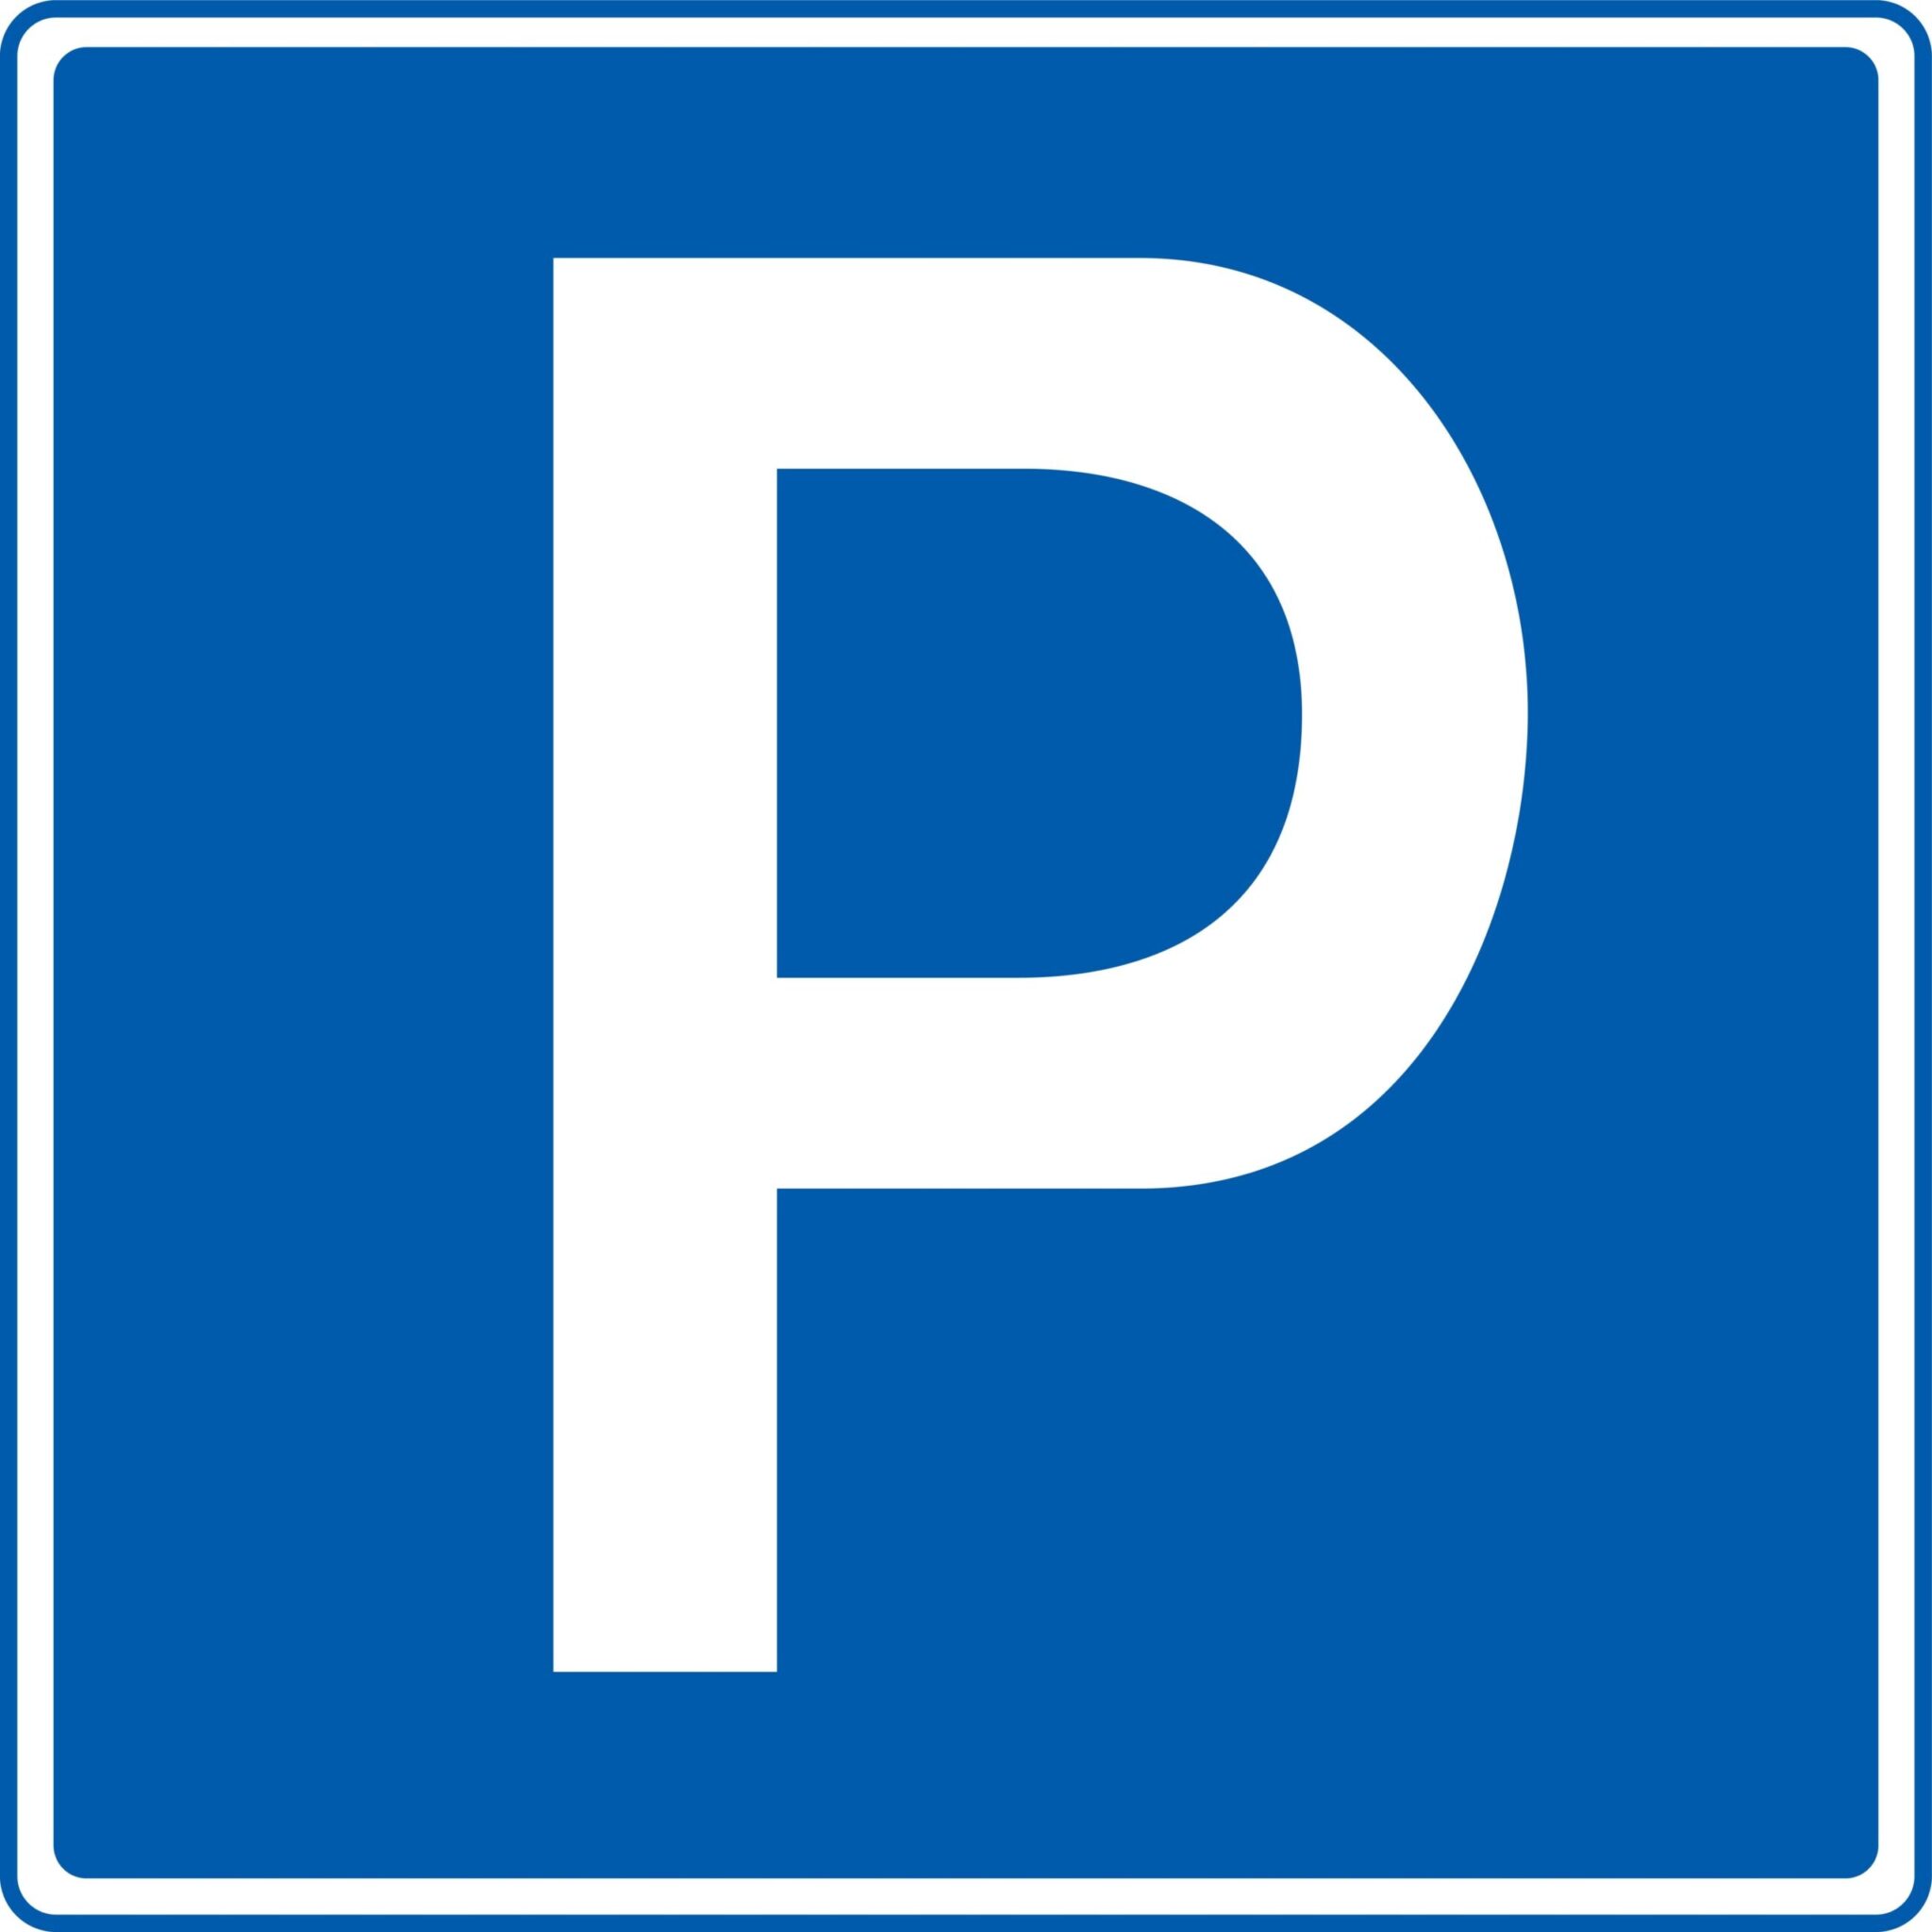 The parking sign, displayed on a white background, is a testament to the demanding task of being a parking attendant.